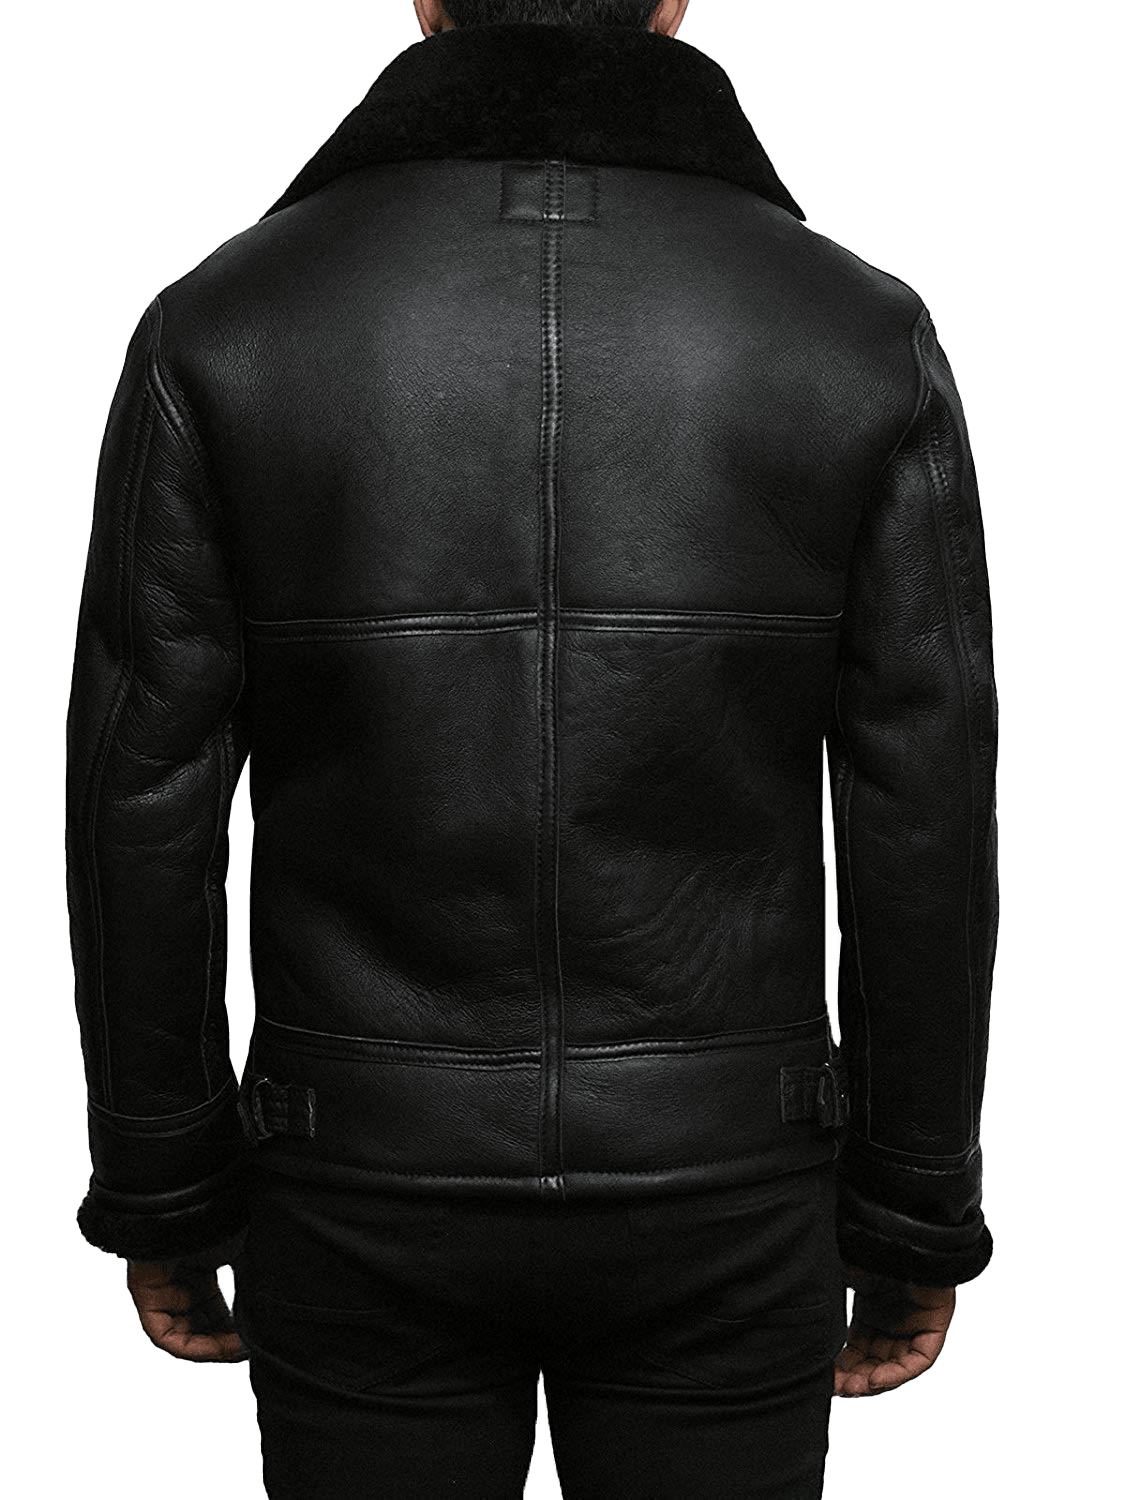 Fly High in Style: B3 RAF Aviator Flight Bomber Shearling Jacket - The Coolest Wingman You'll Ever Wear! - Button Stitched